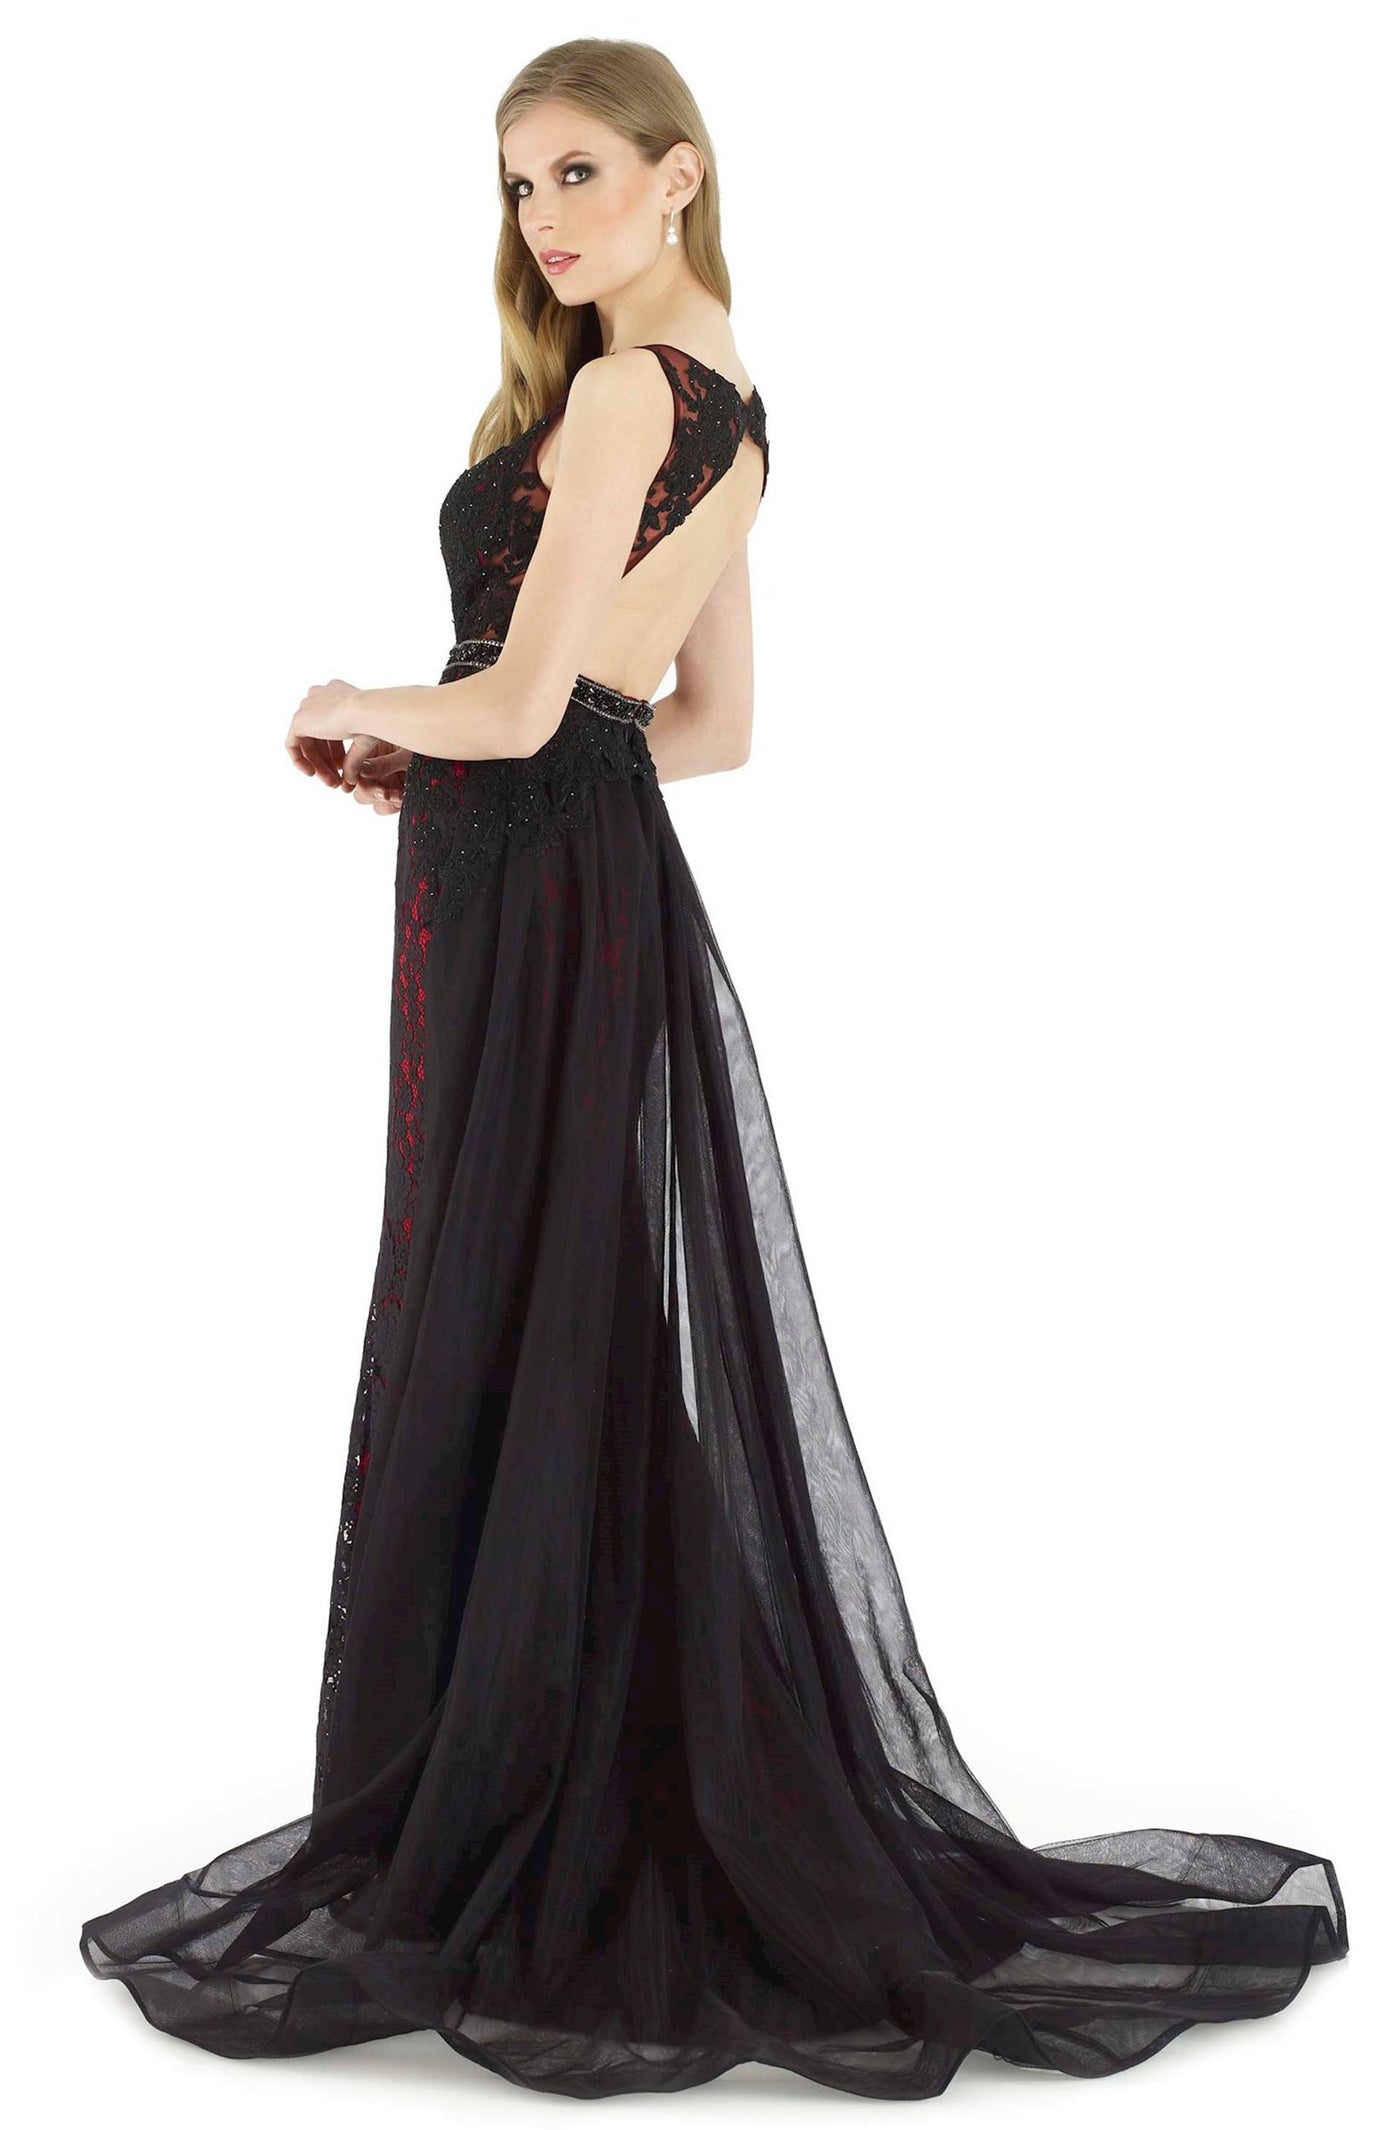 Morrell Maxie - 15927 Embellished Lace Illusion Bateau Sheath Dress in Black and Red